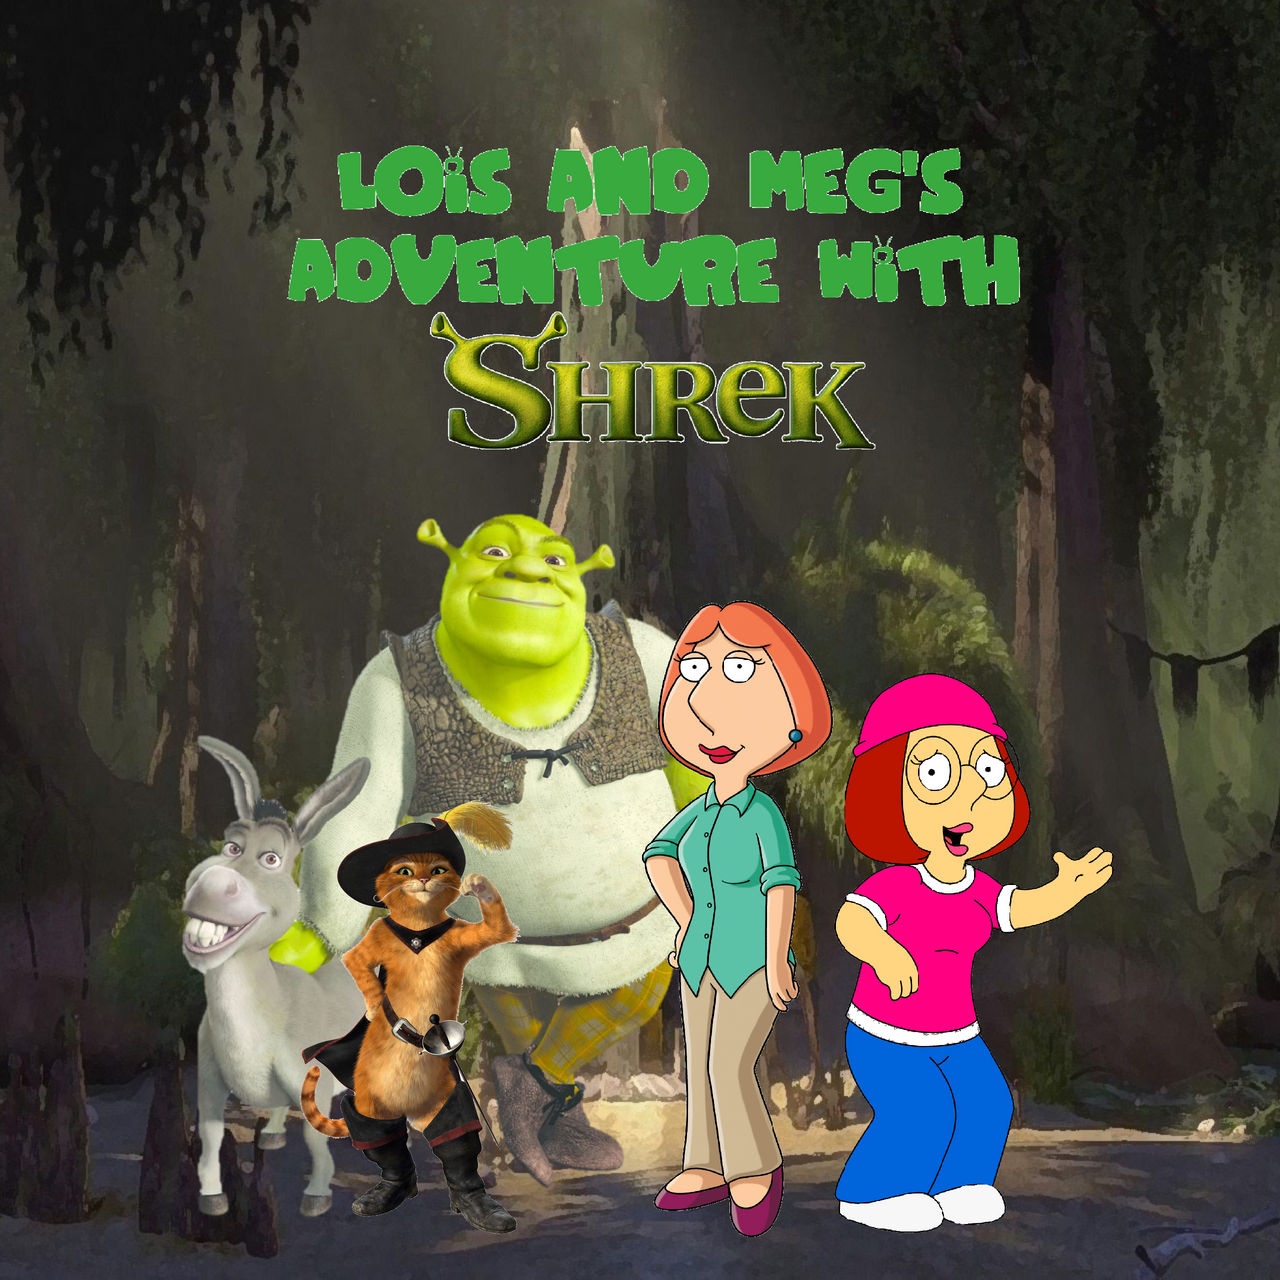 Shrek, Donkey And Puss In Boots by raffaelecolimodio on DeviantArt